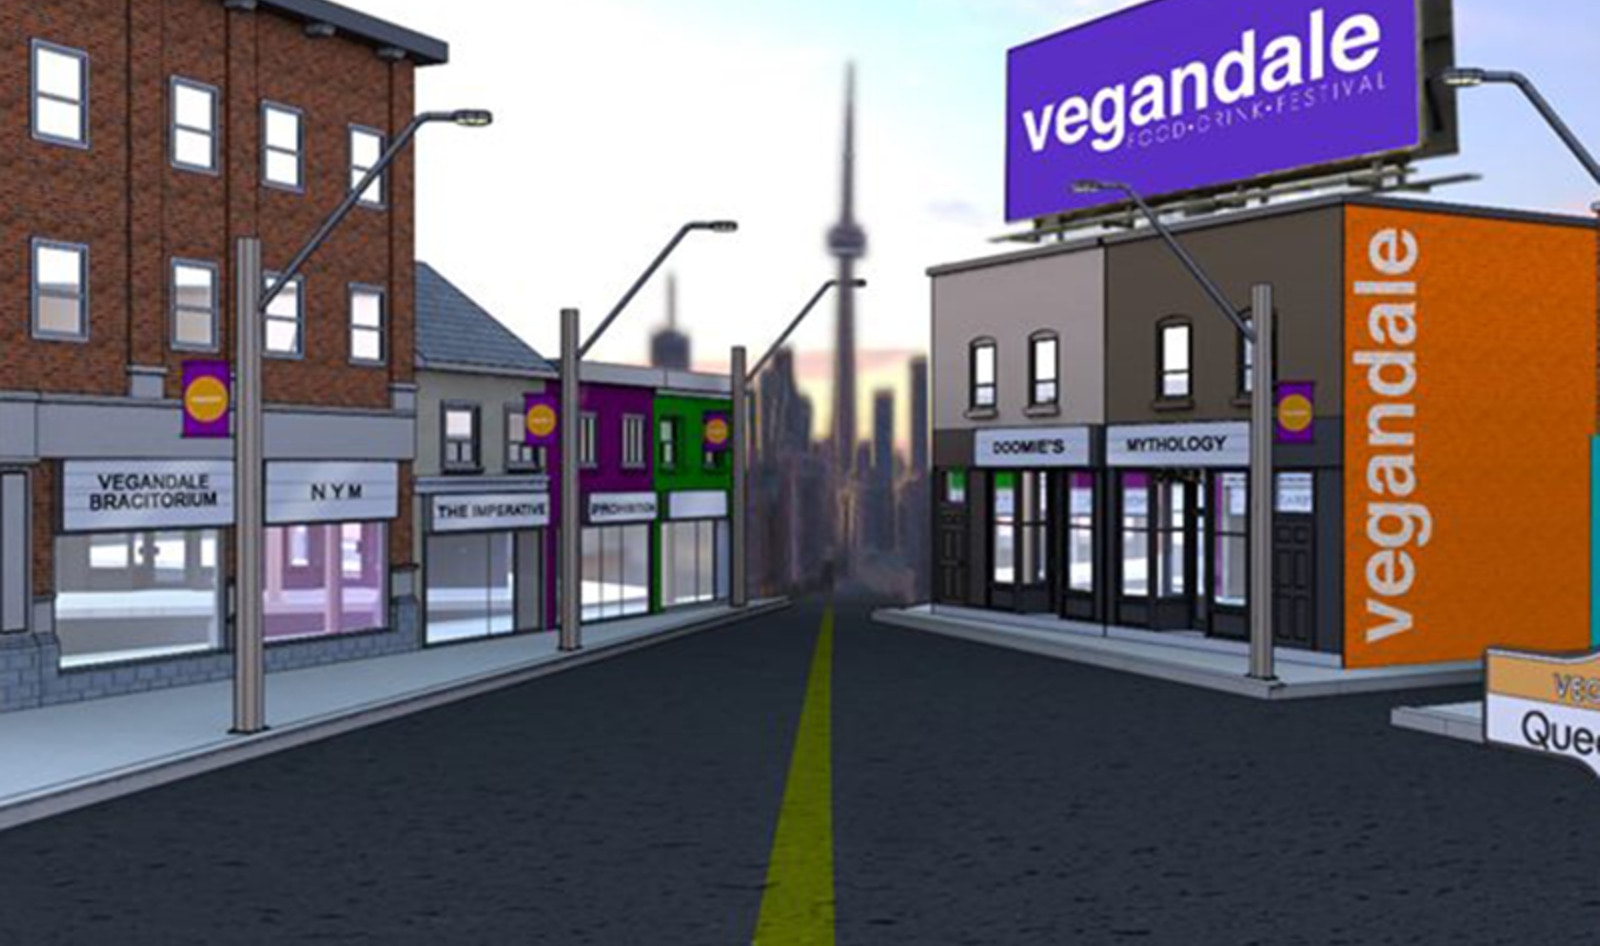 Vegandale Businesses Commit $100,000 to Support Local Community